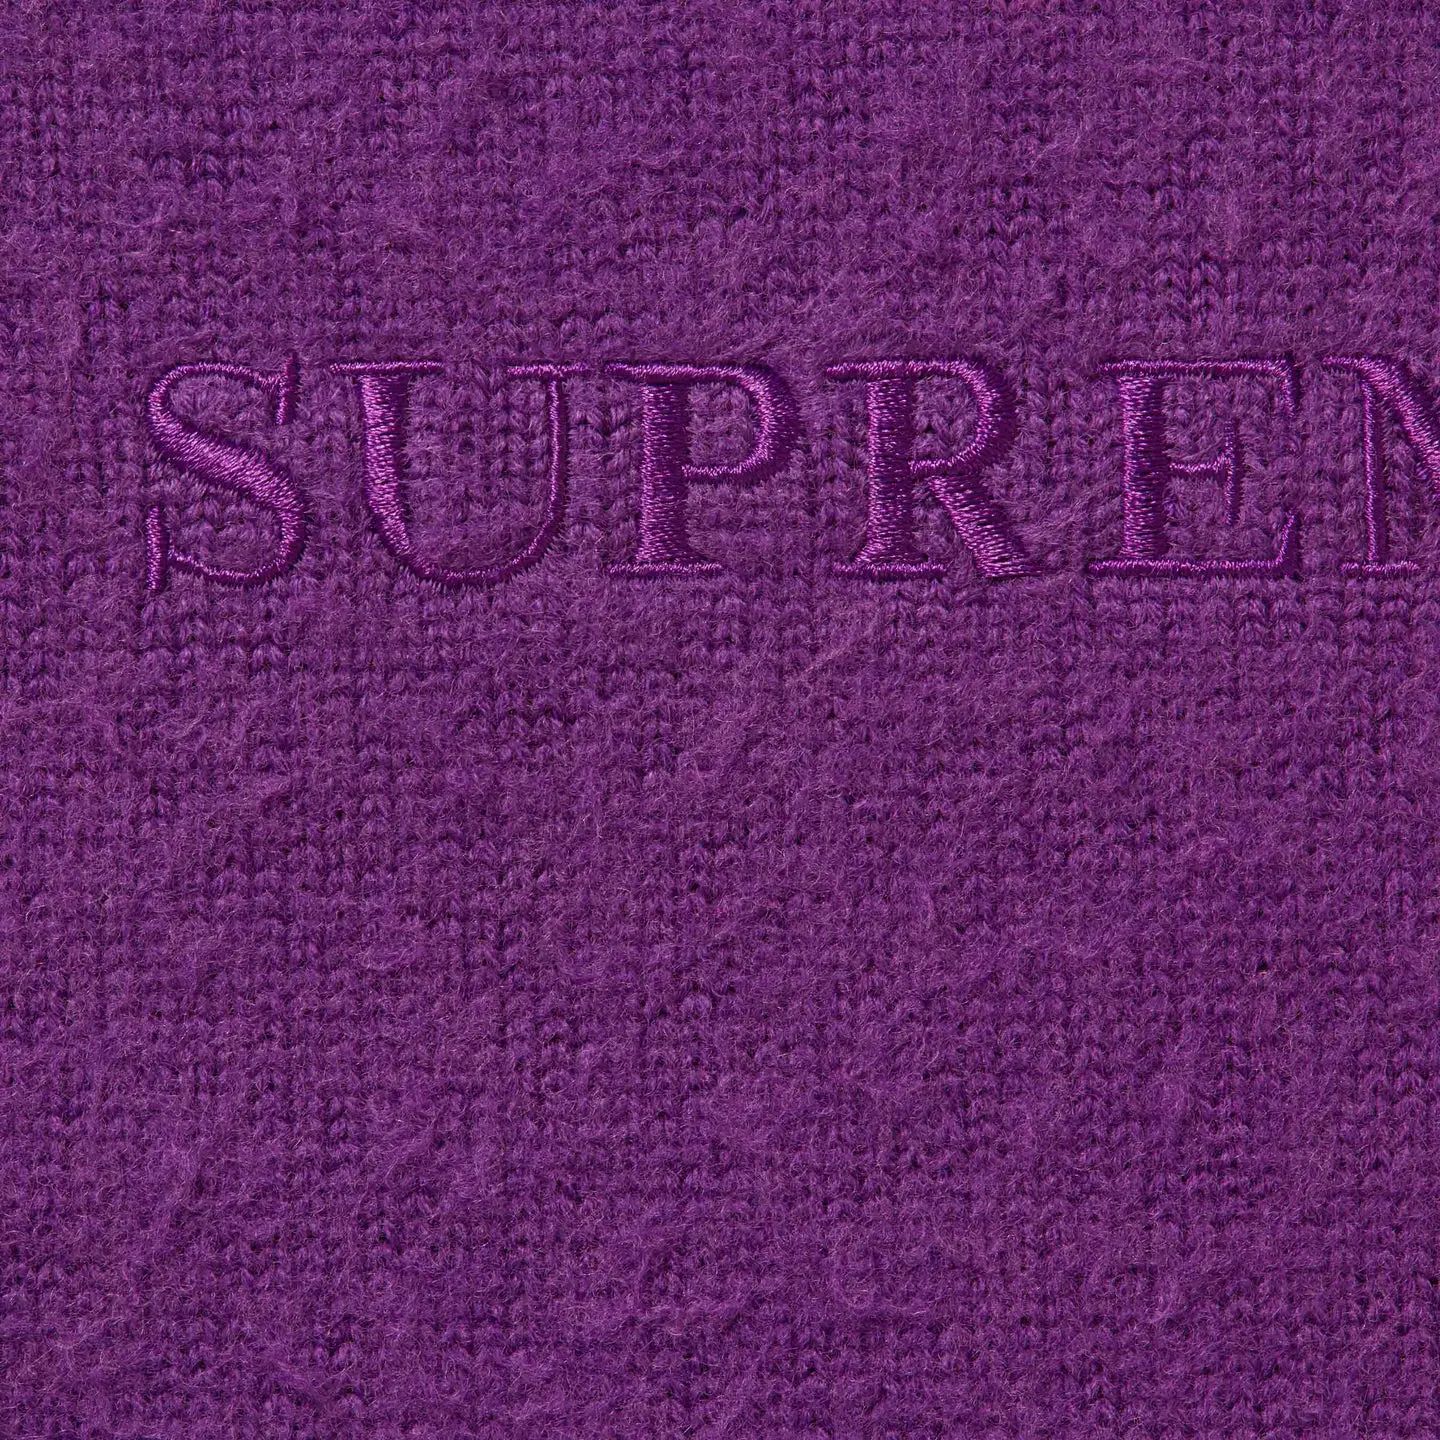 Pilled Sweater | Supreme 23fw